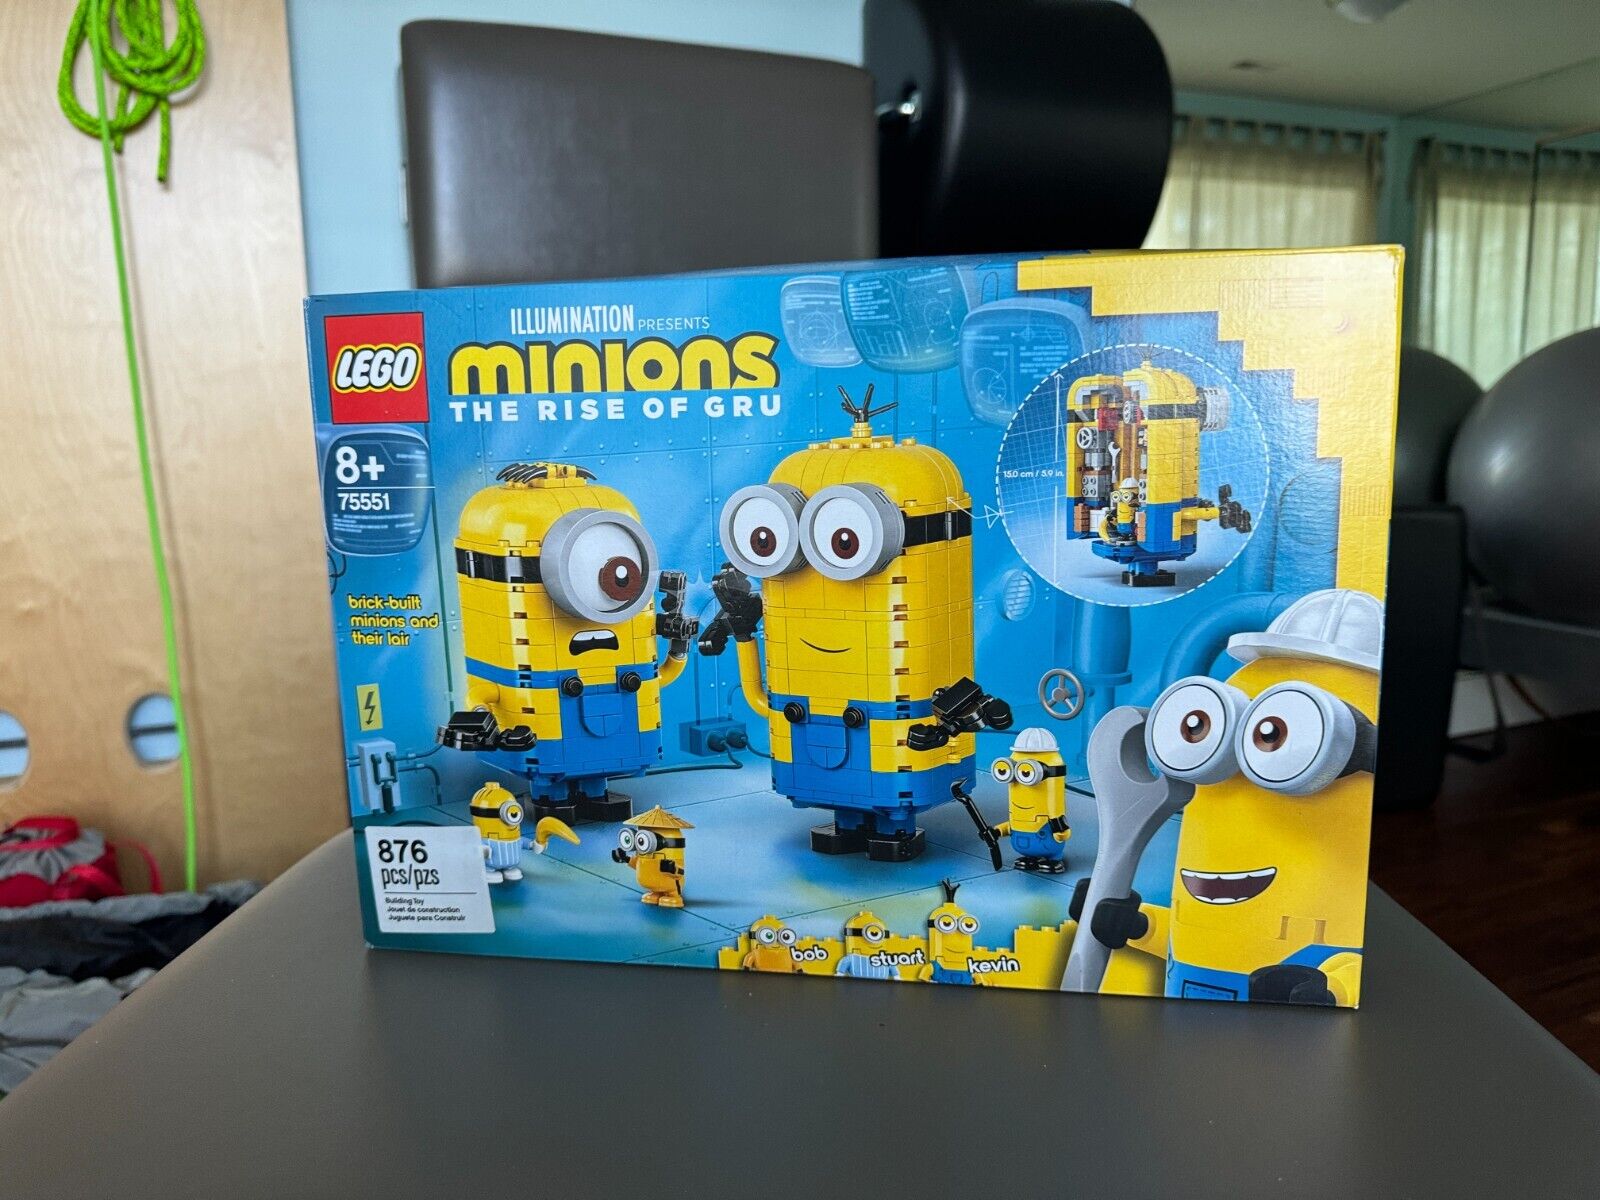 LEGO Minions: Brick-built Minions and their Lair (75551). New / Unopened